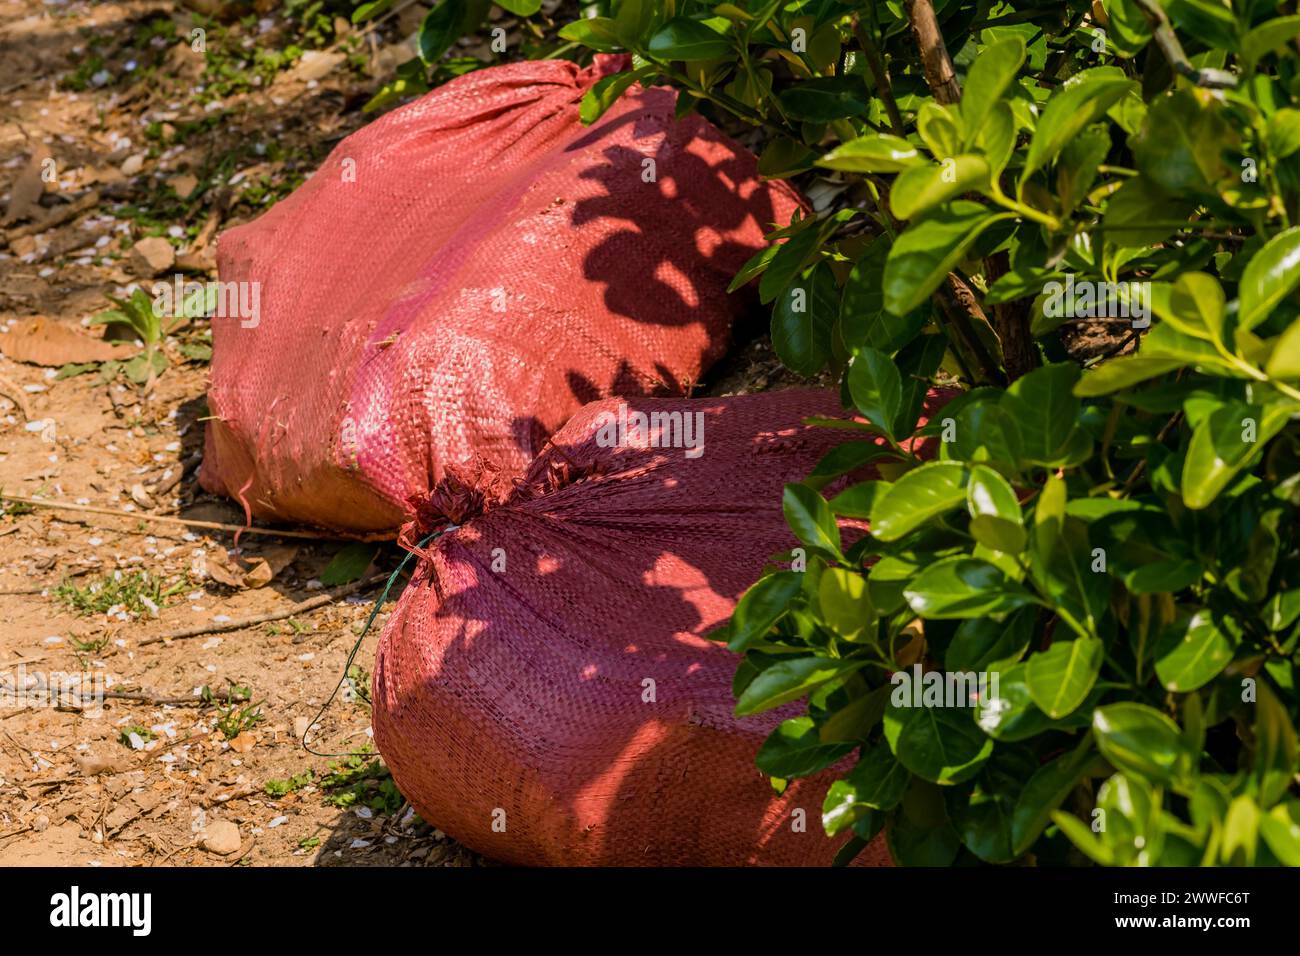 A red net bag filled with waste lying next to green shrubs, in South Korea Stock Photo